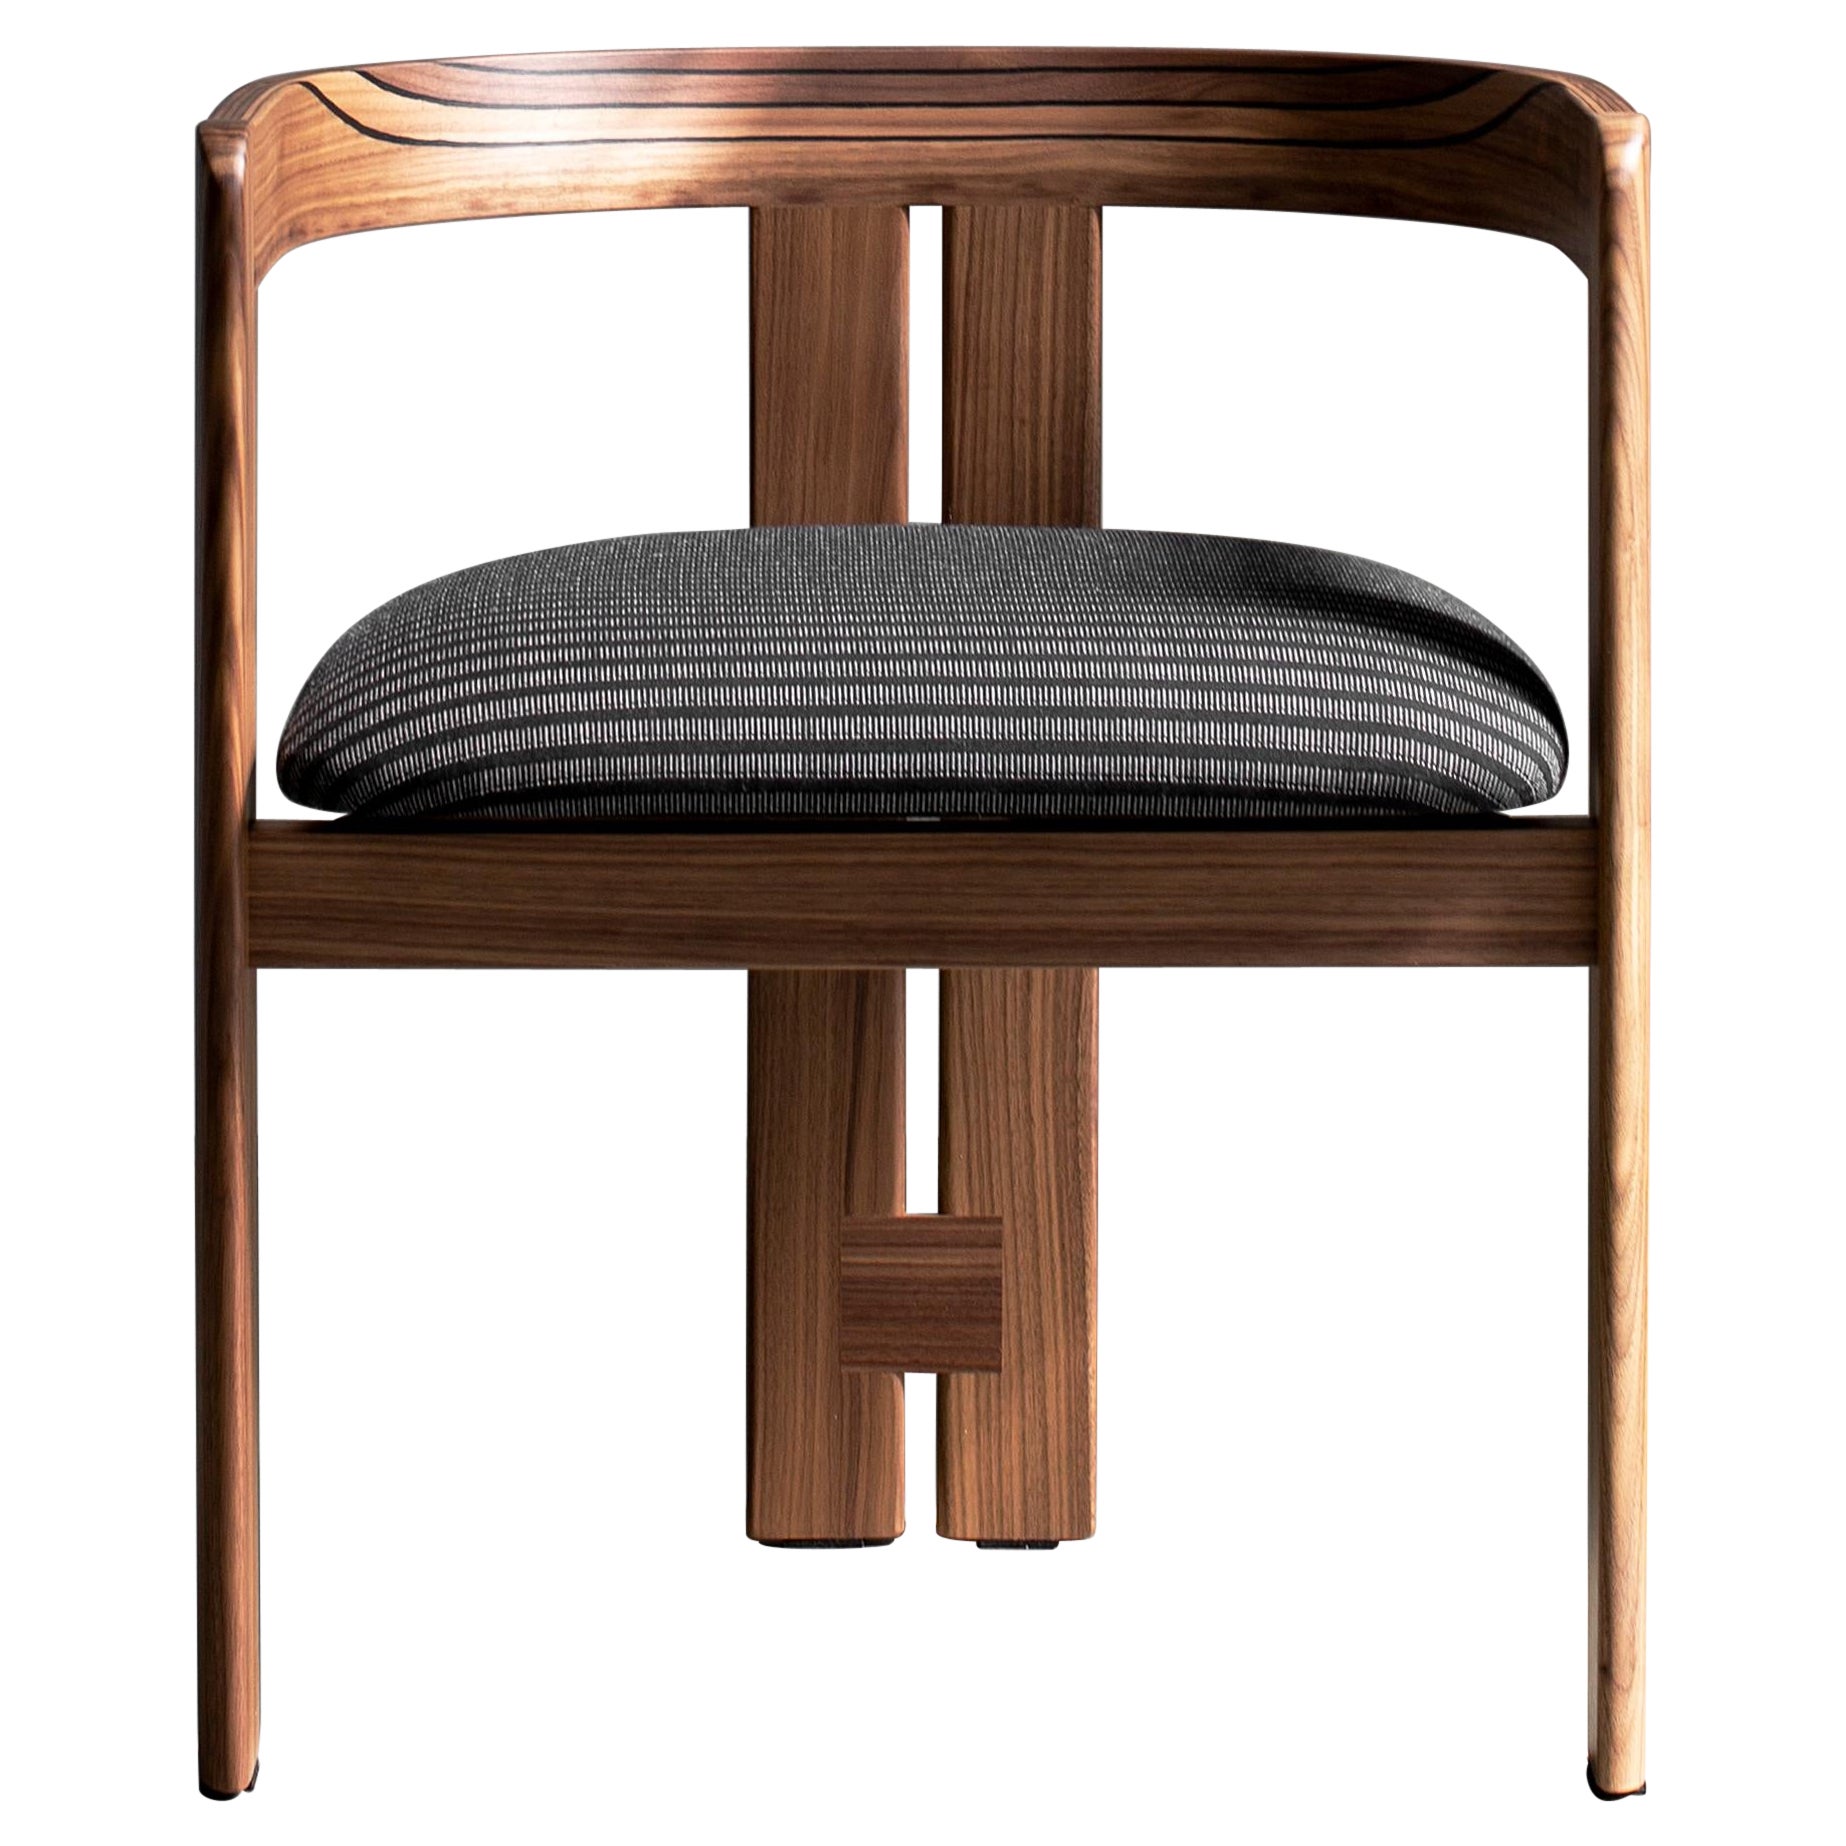 Tacchini Pigreco Chair Limited Edition in Lippia 07 Upholstery with Walnut Frame